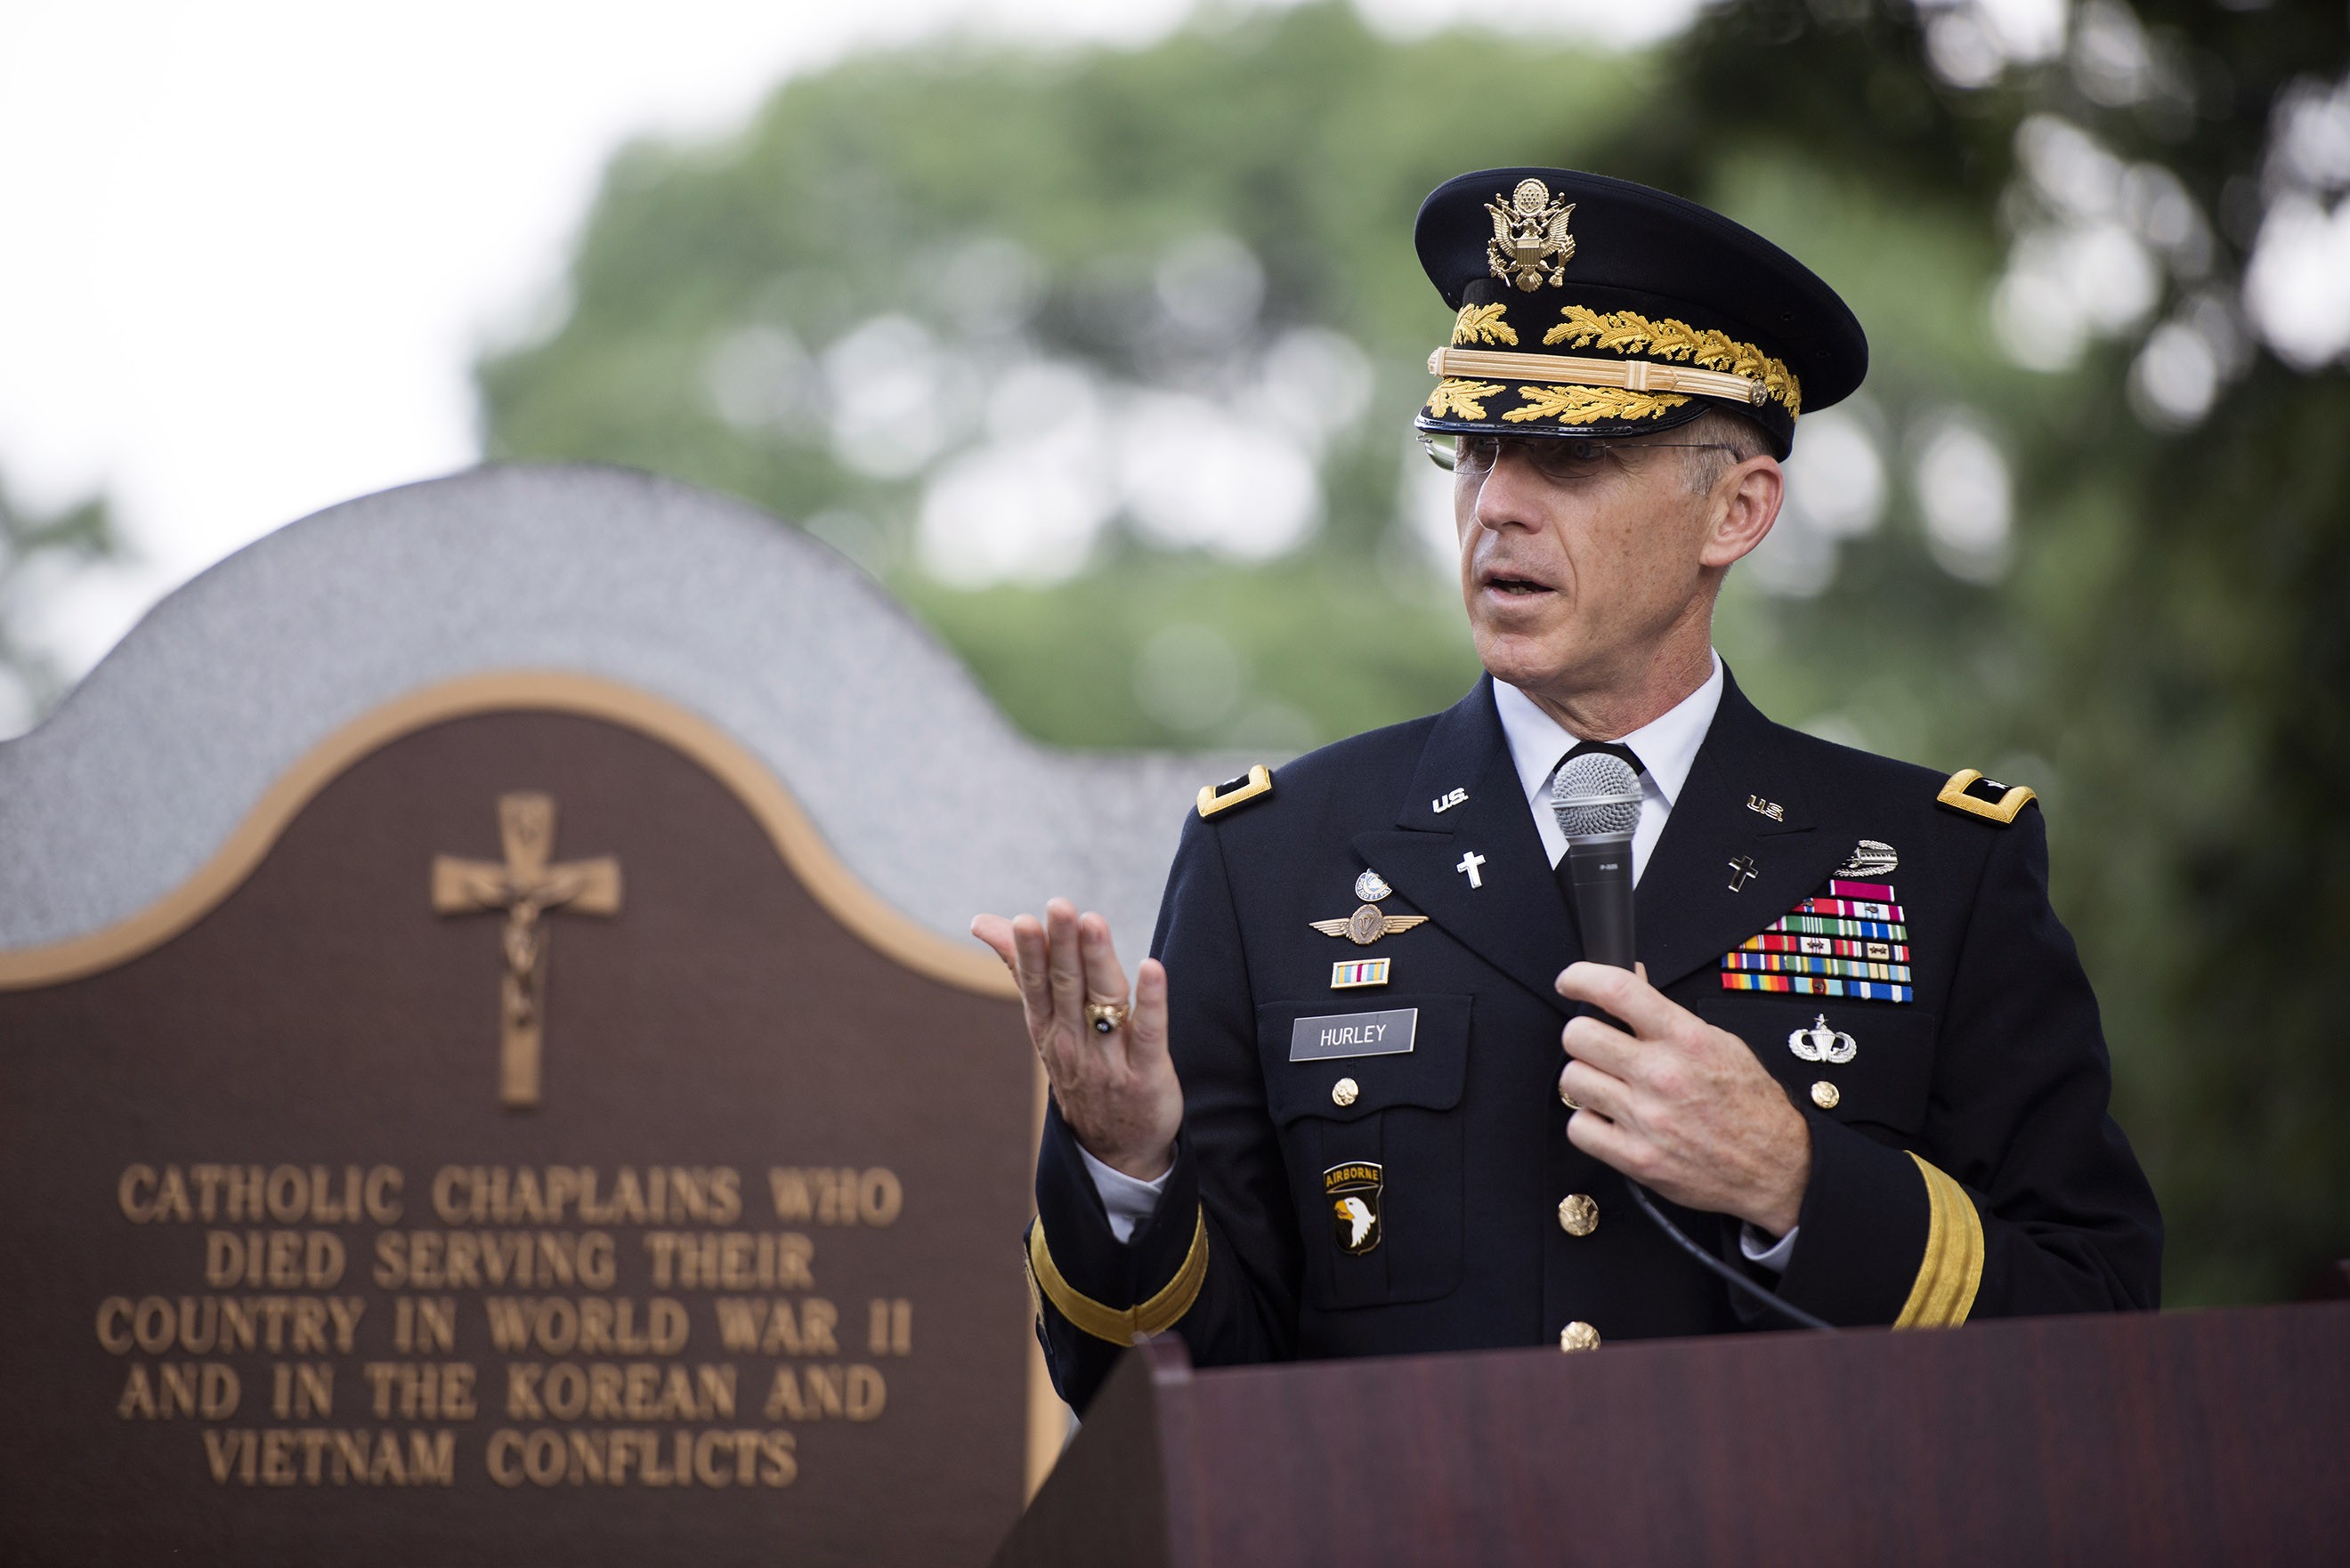 Army chaplains celebrate 241 years of service Article The United